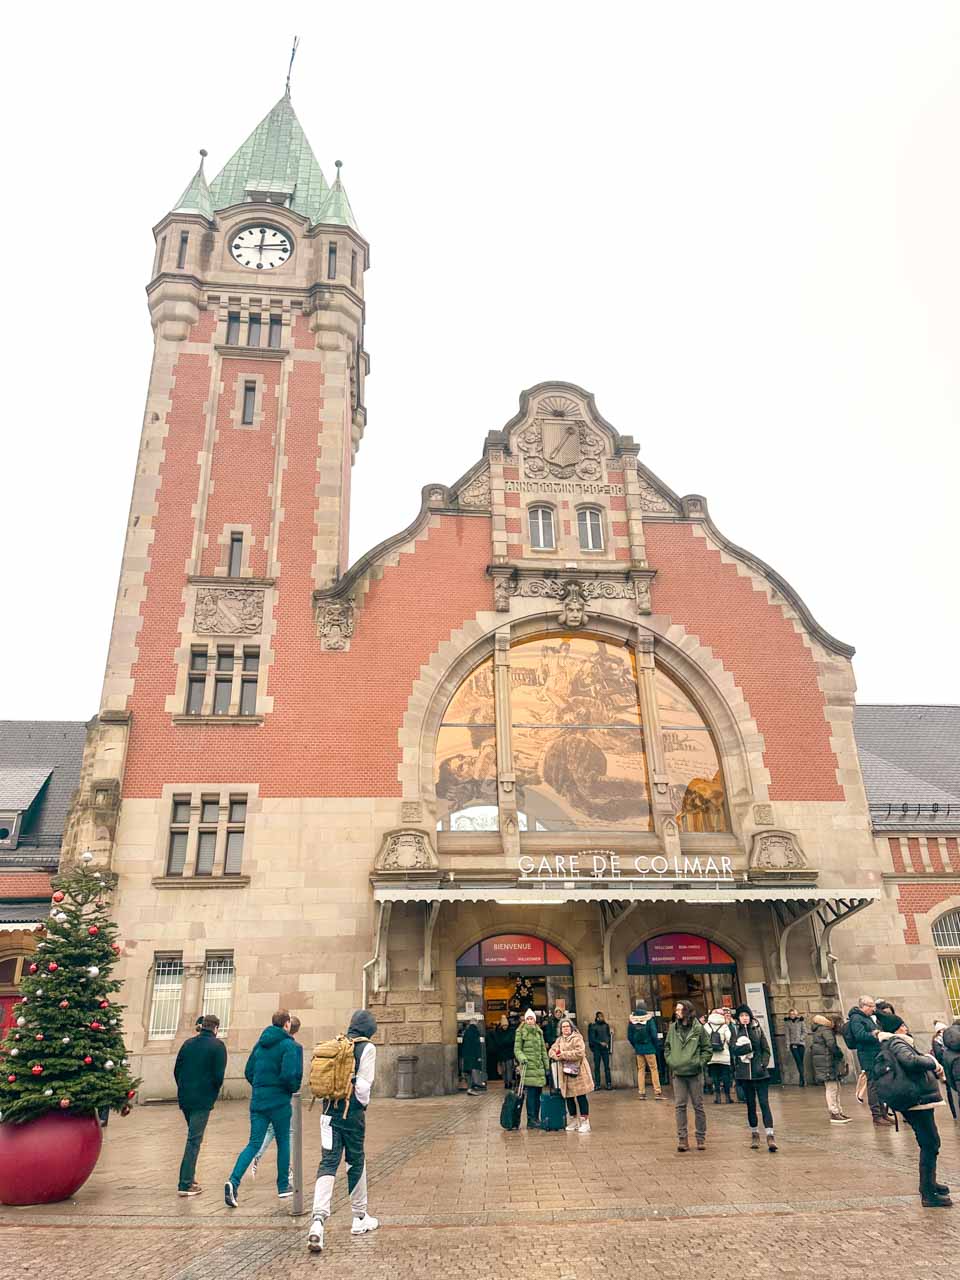 The front of Colmar train station, with its grand clock tower and festive decorations